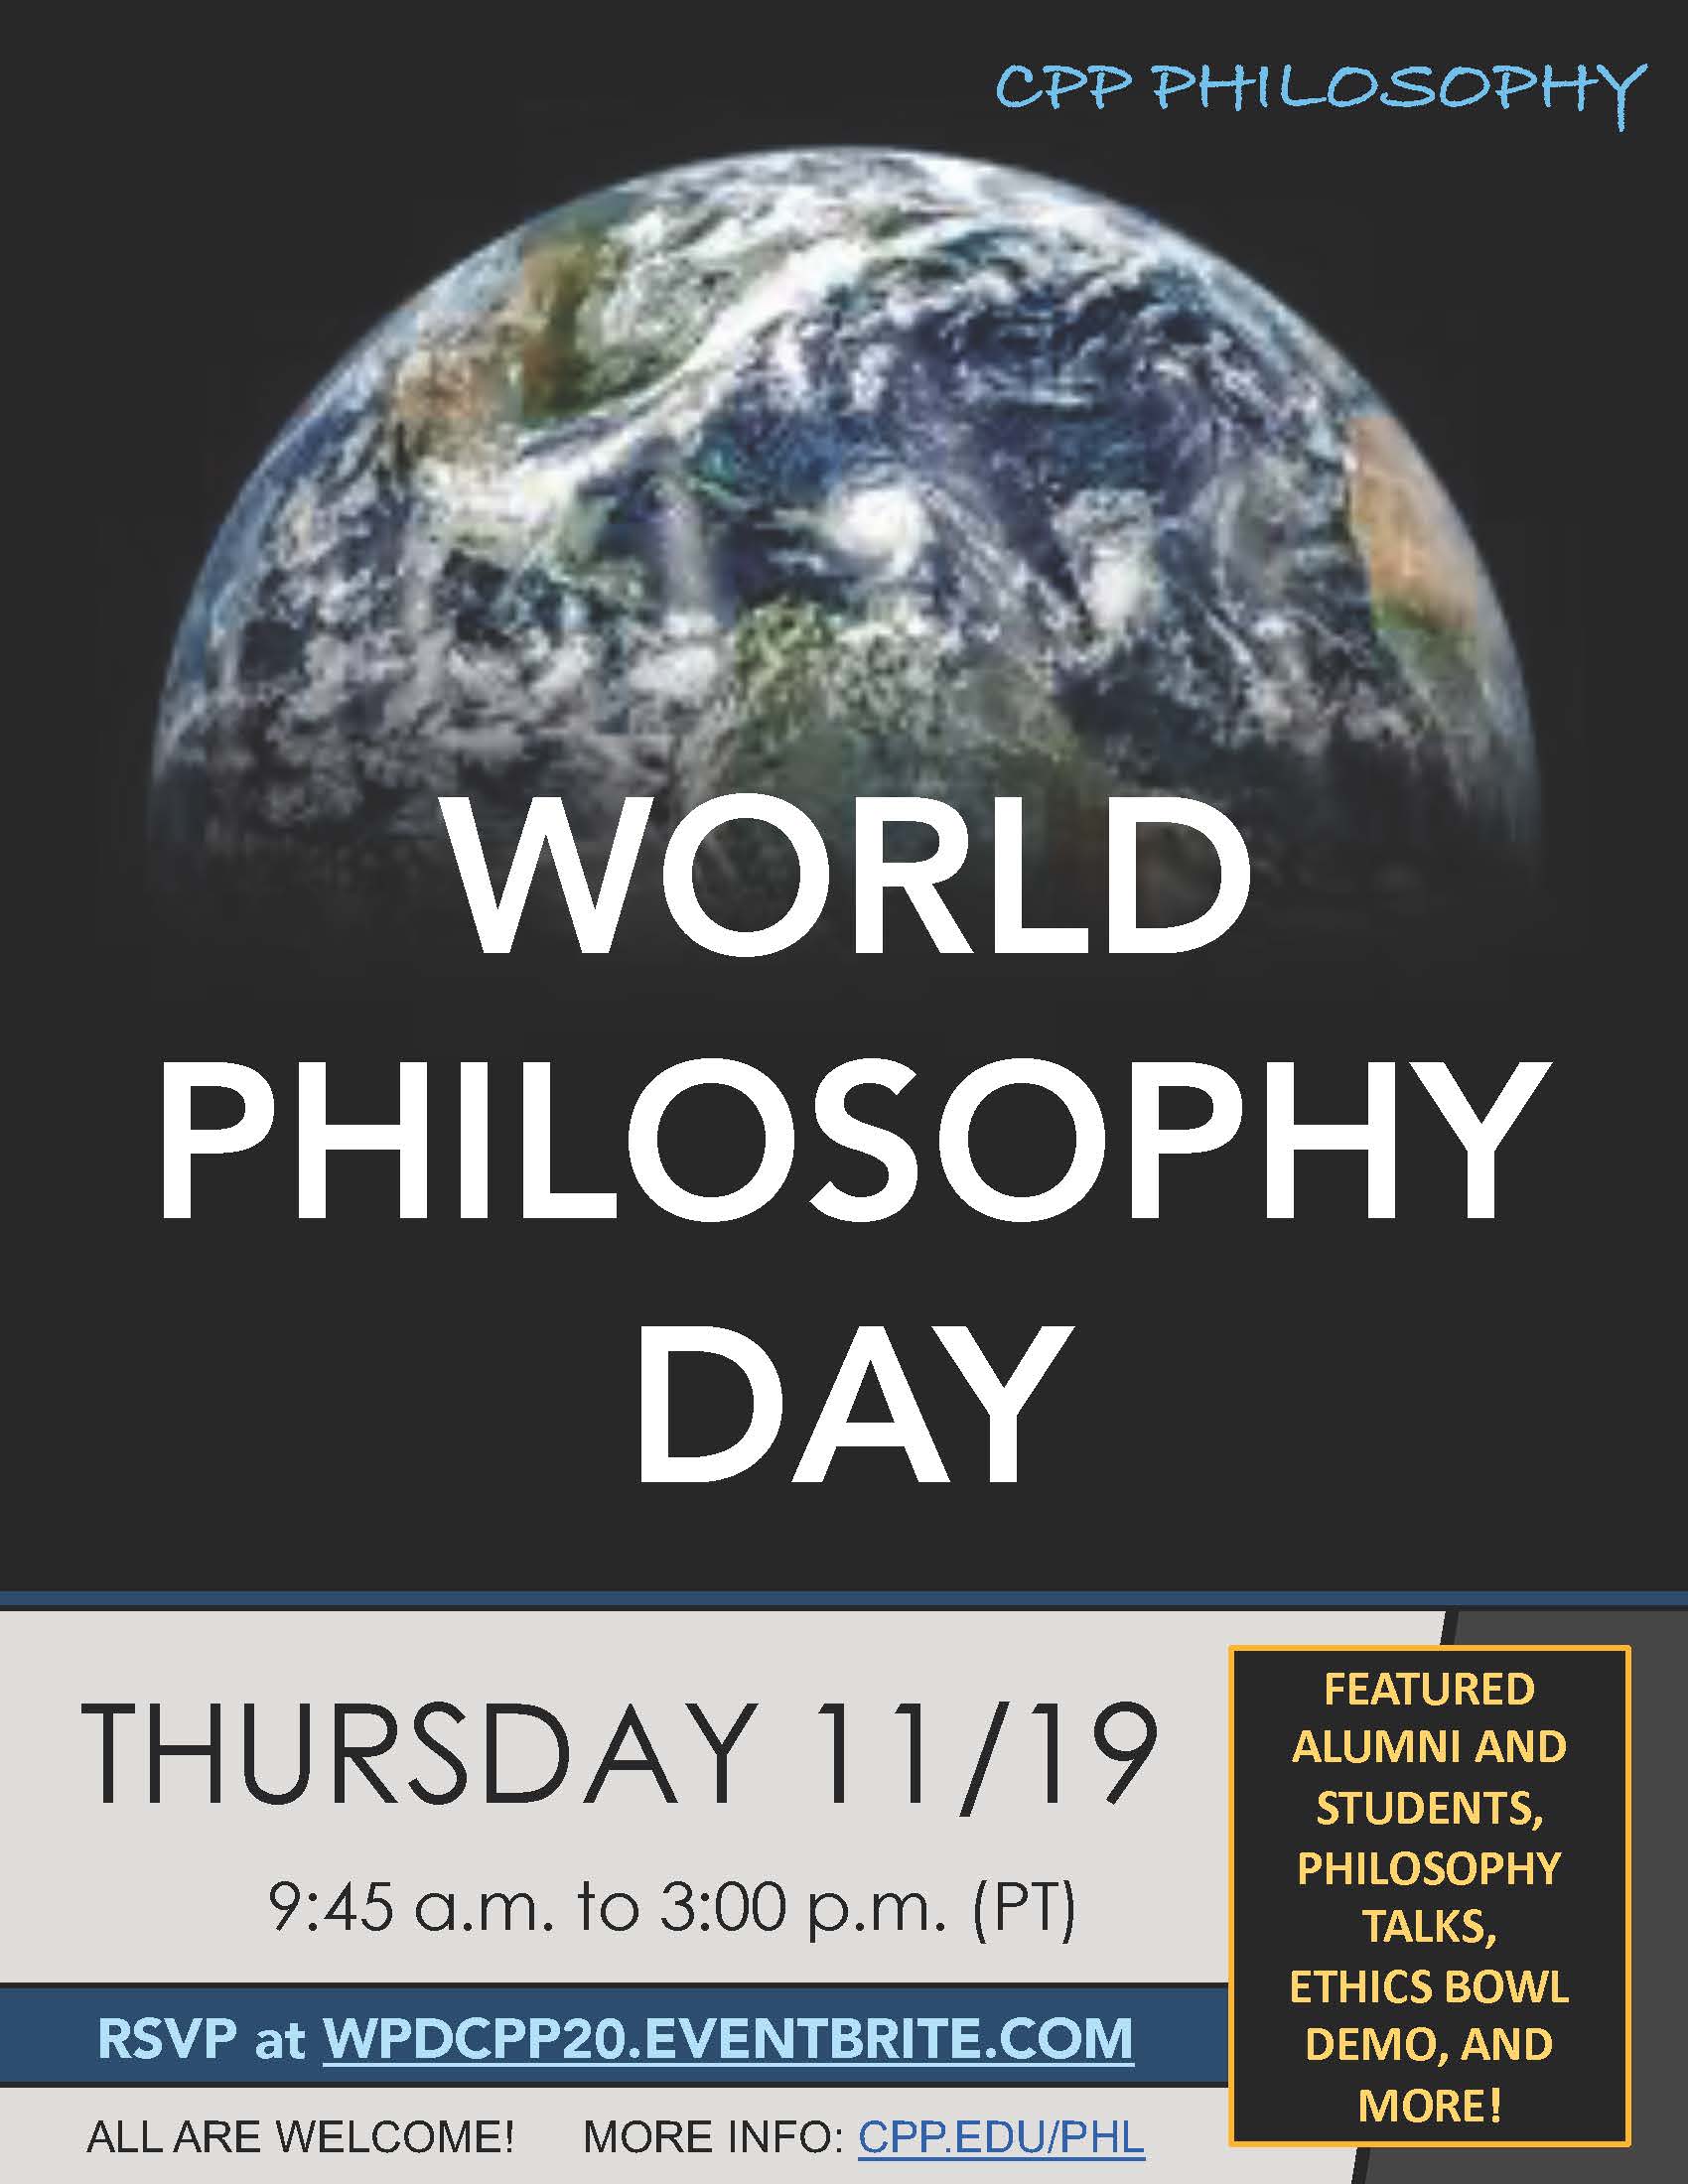 CPP Philosophy.  World Philosophy Day.  Thursday 11/19.  9:45am to 3:00 pm (PT).  RSVP at WPDCPP20.EVENTBRITE.COM.  ALL ARE WELCOME!  MORE INFO:  CPP.EDU/PHL.  Featured Alumni and Studetns, Philosophy Talks, Ethics Bowl Demo, and More!